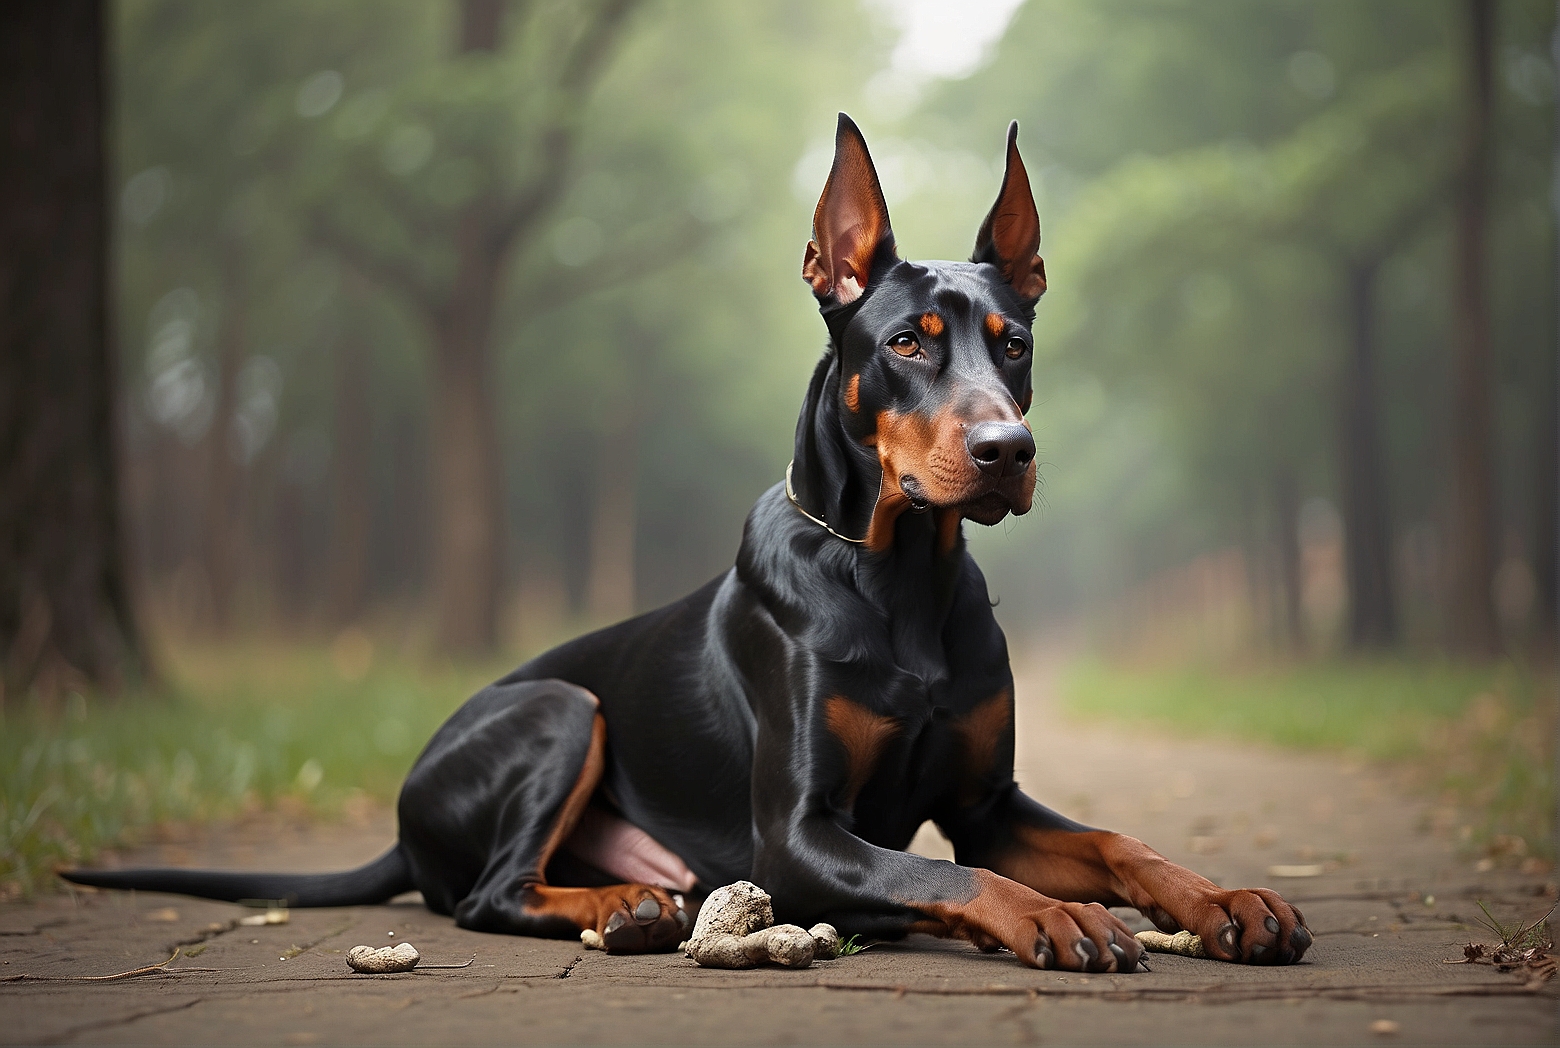 How to train a Doberman to stop biting